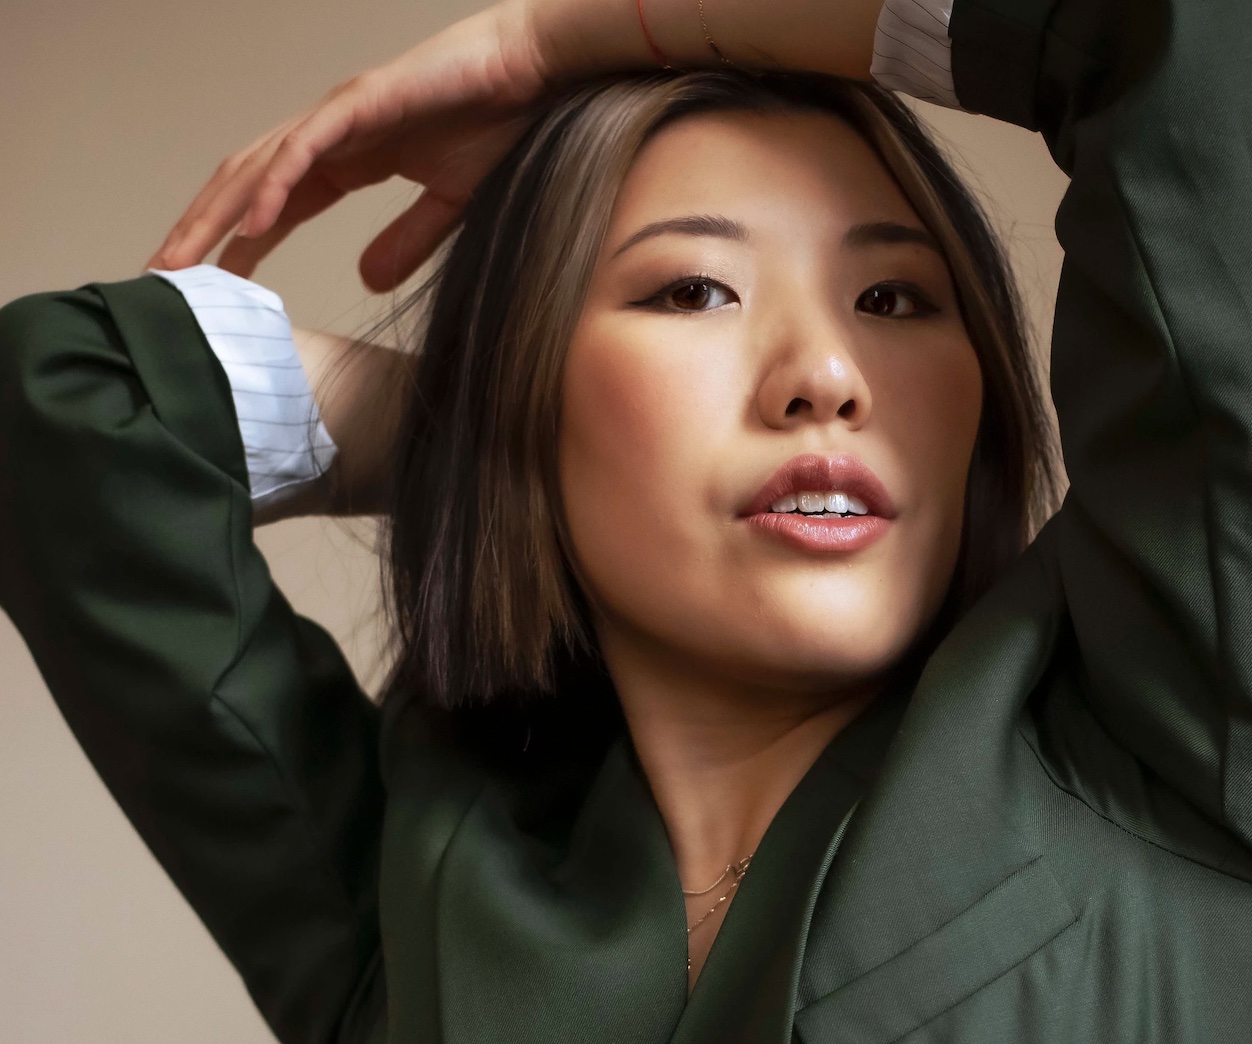 Photo of Stephanie Fung. They wear a green jacket and have their arms above their head.